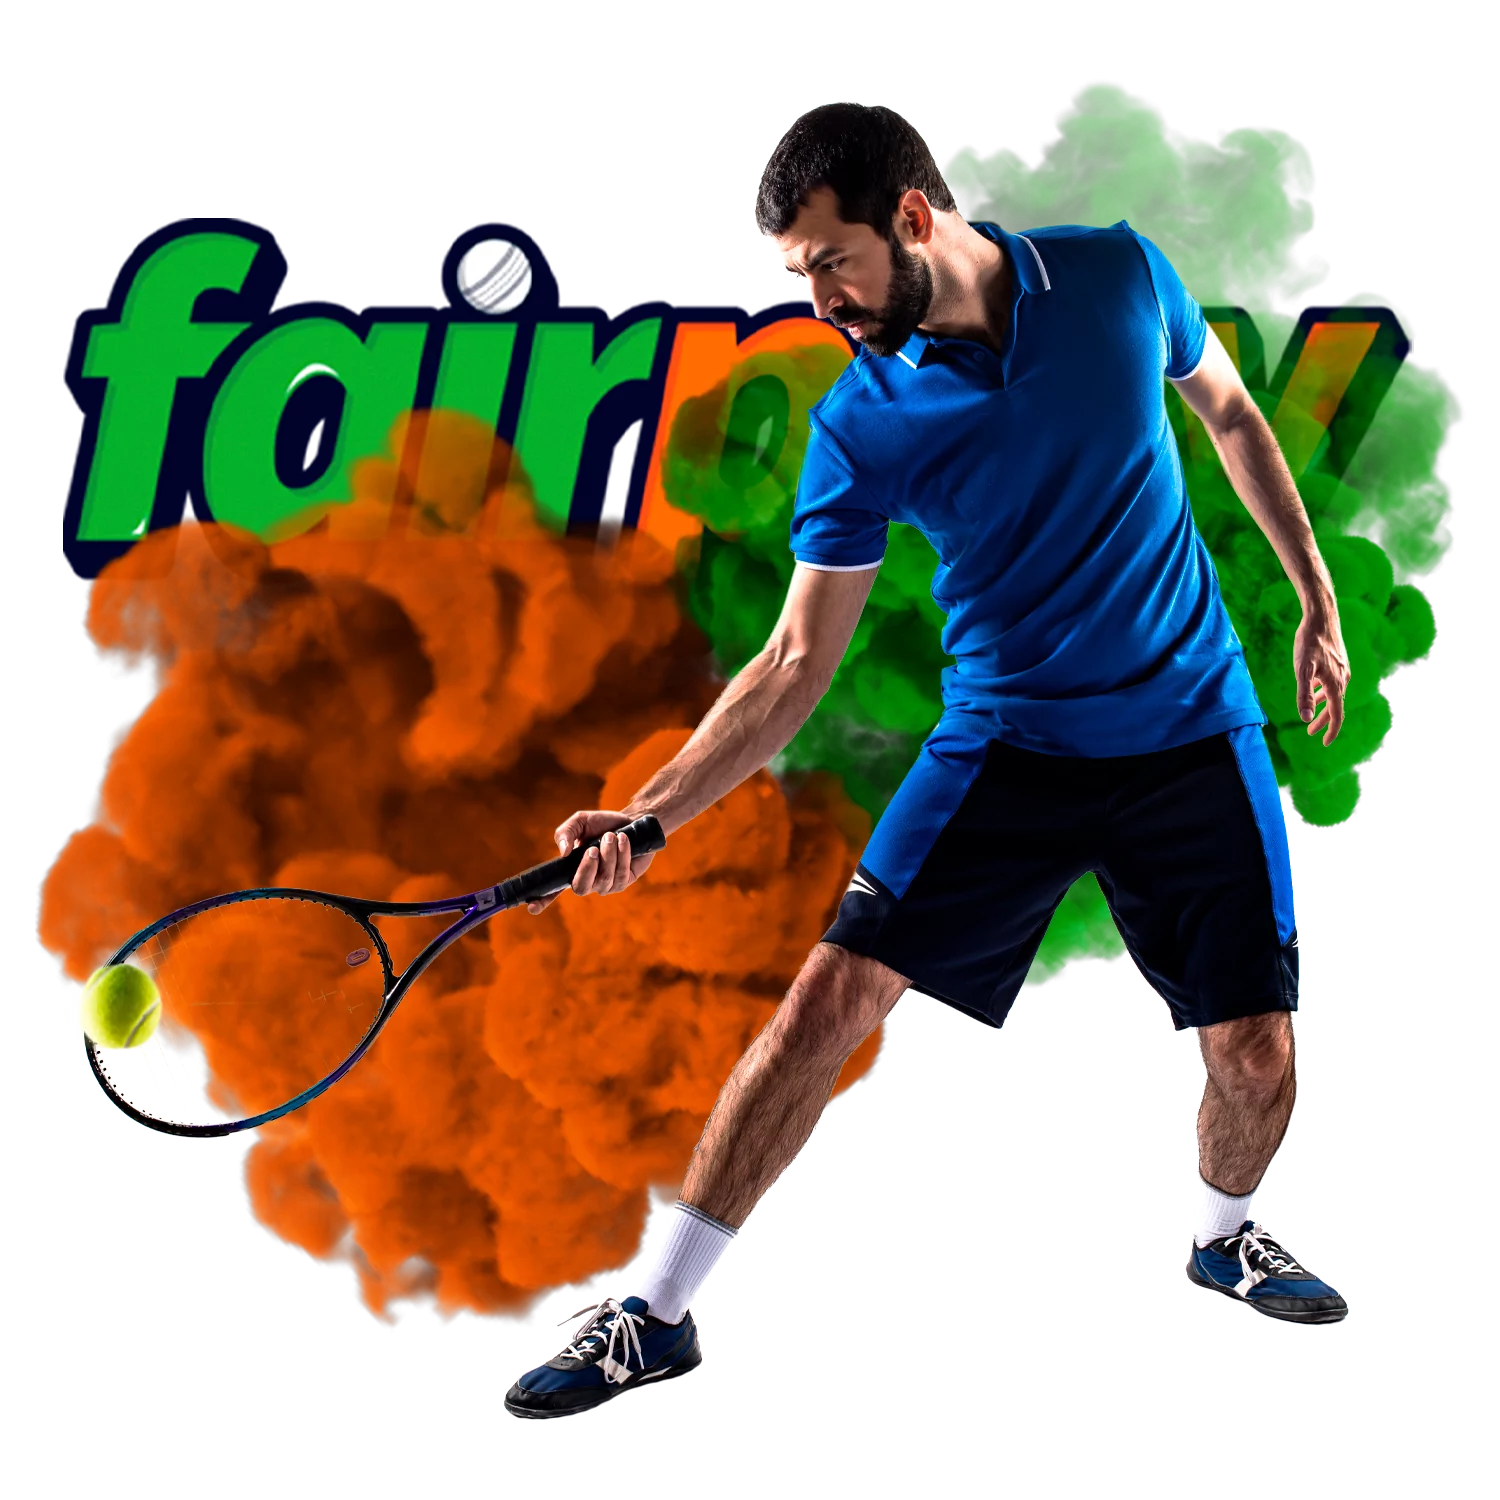 Learn how to place bets on tennis events on Fairplay.